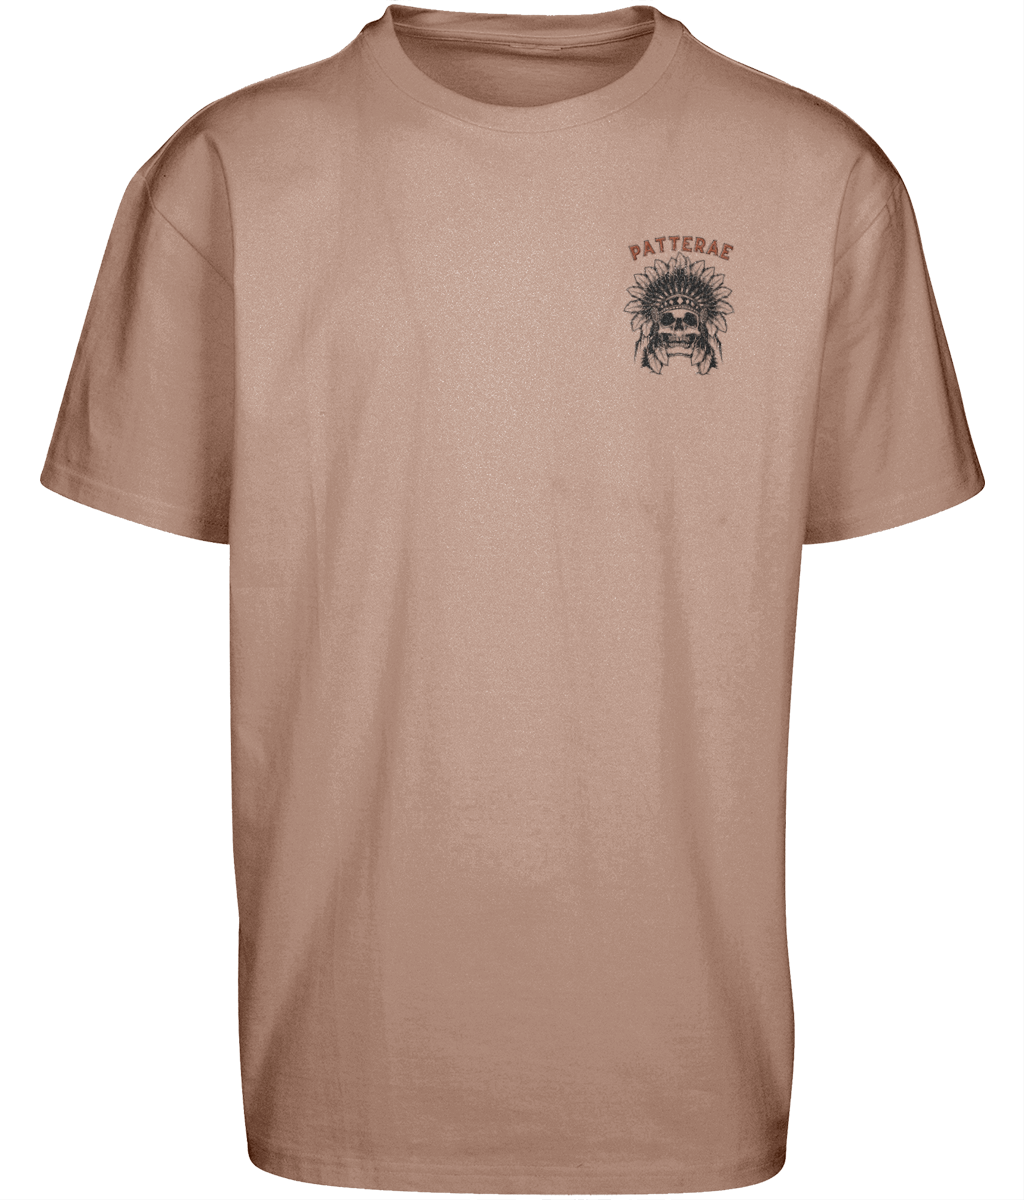 THE INDIAN SKULL T-SHIRT